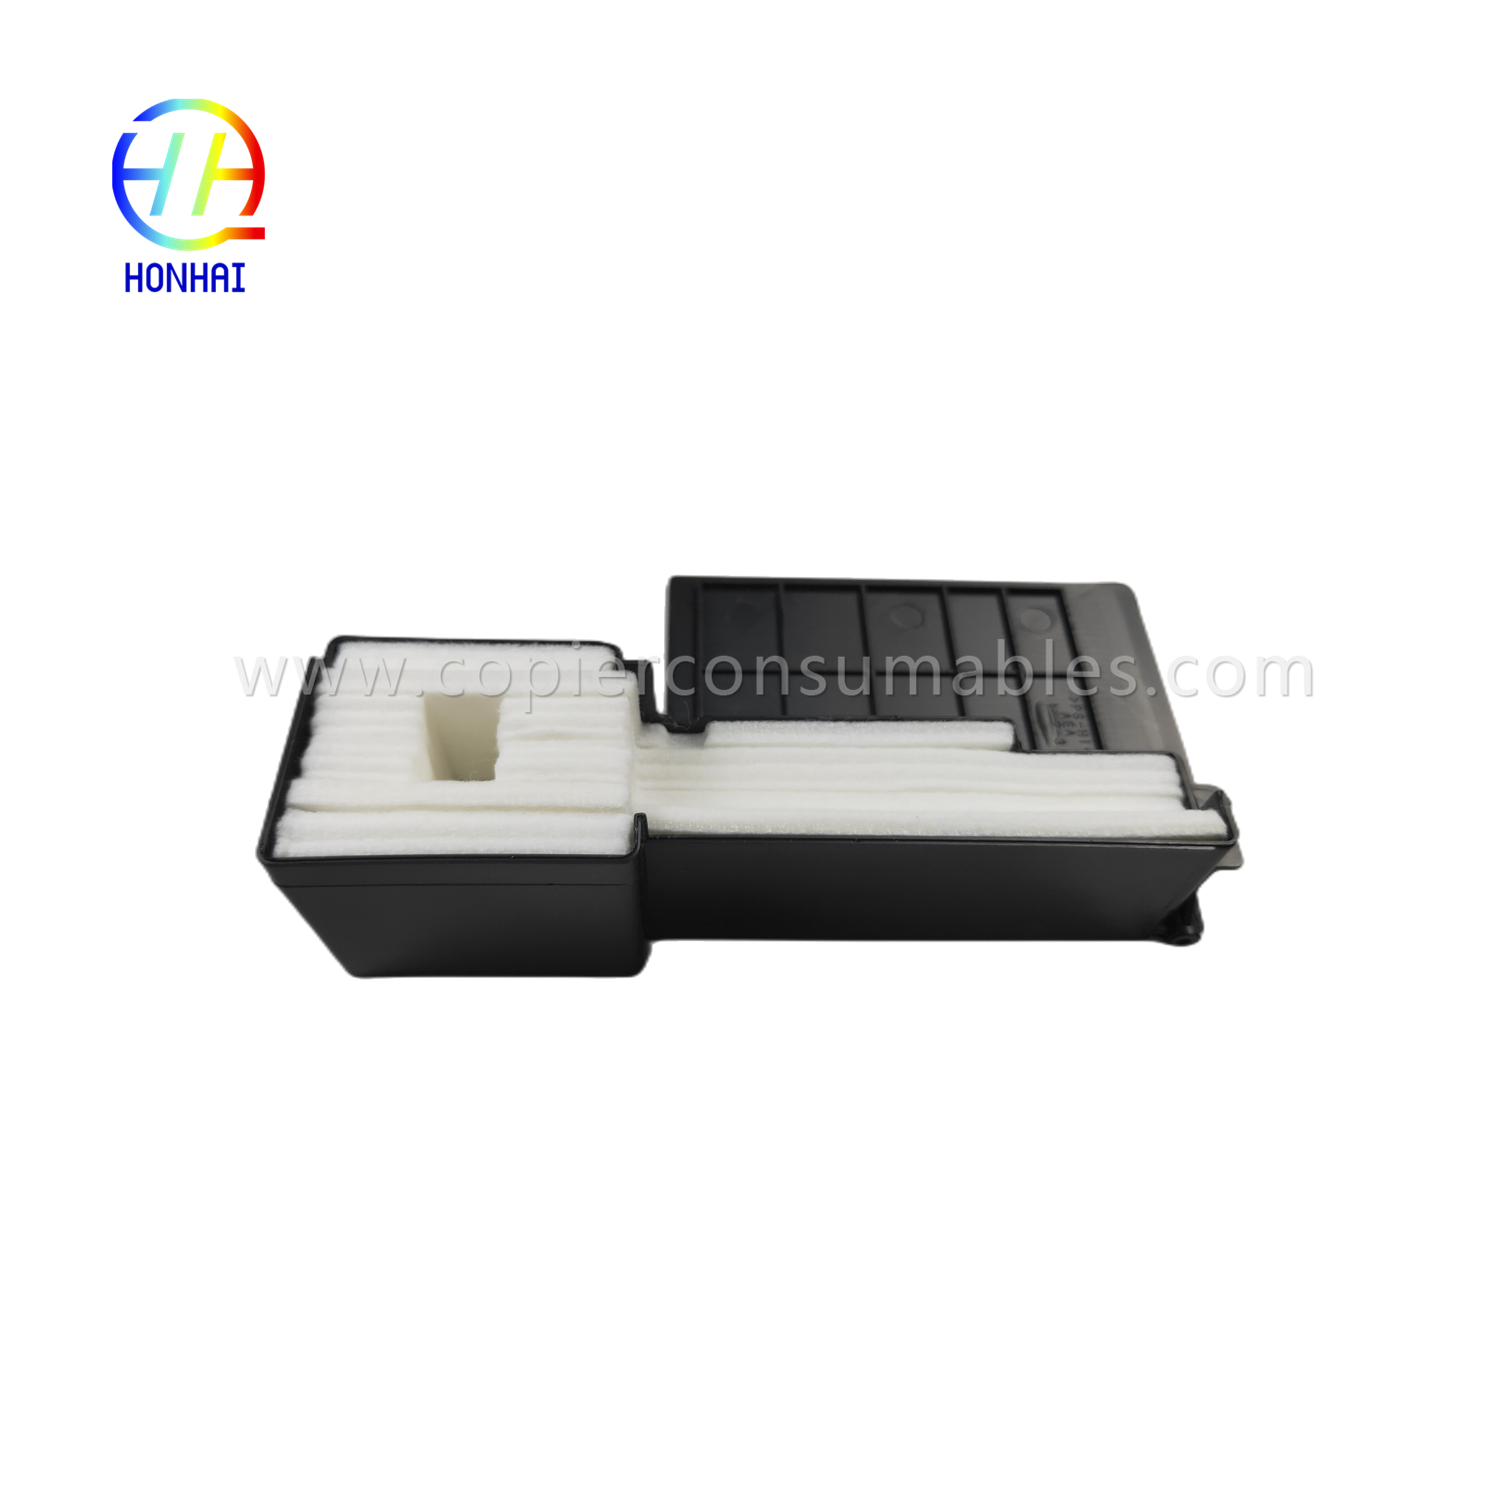 https://www.copierconsumables.com/waste-inktpad-pack-forl220-l360-l380-printer-product/